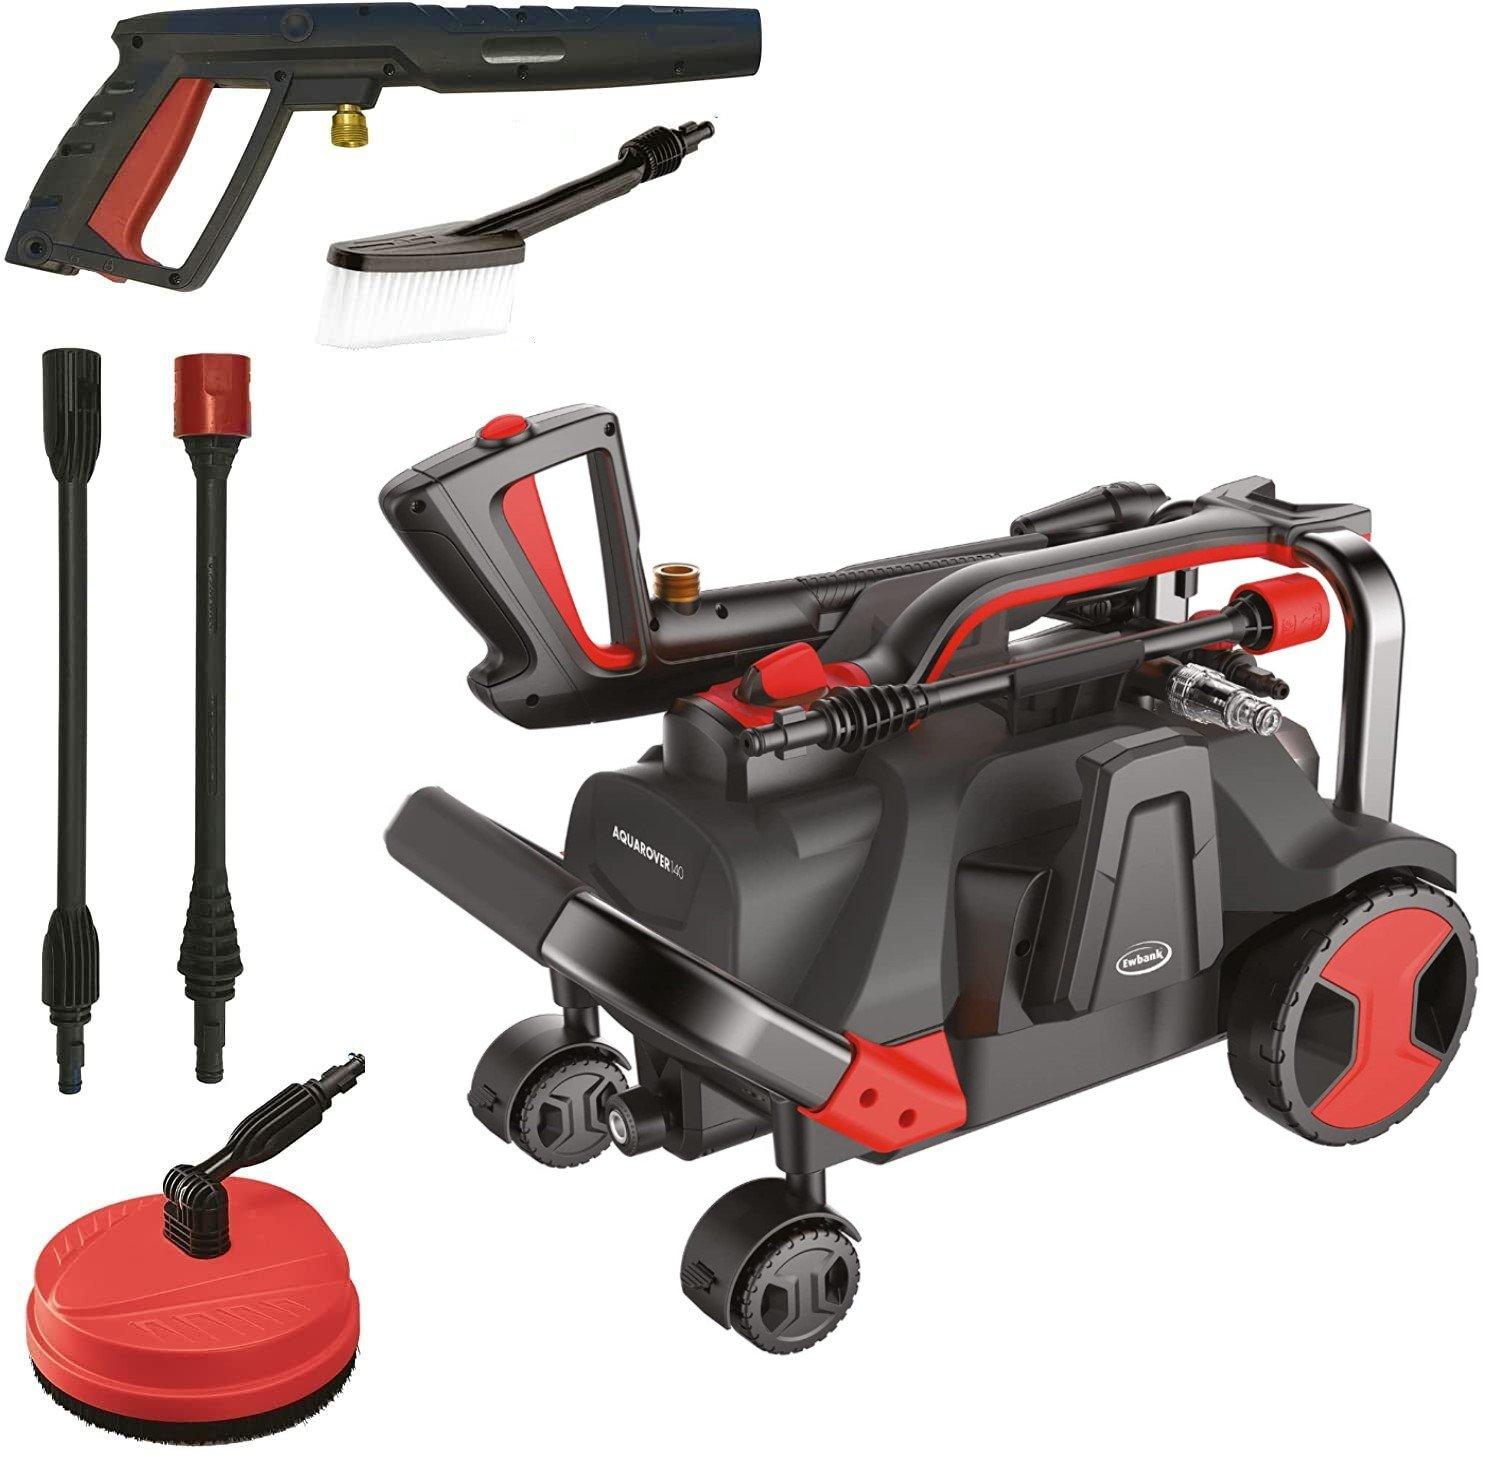 High Power Pressure Washer, 140 Bar/2030 PSI, 4 Wheel Mobility